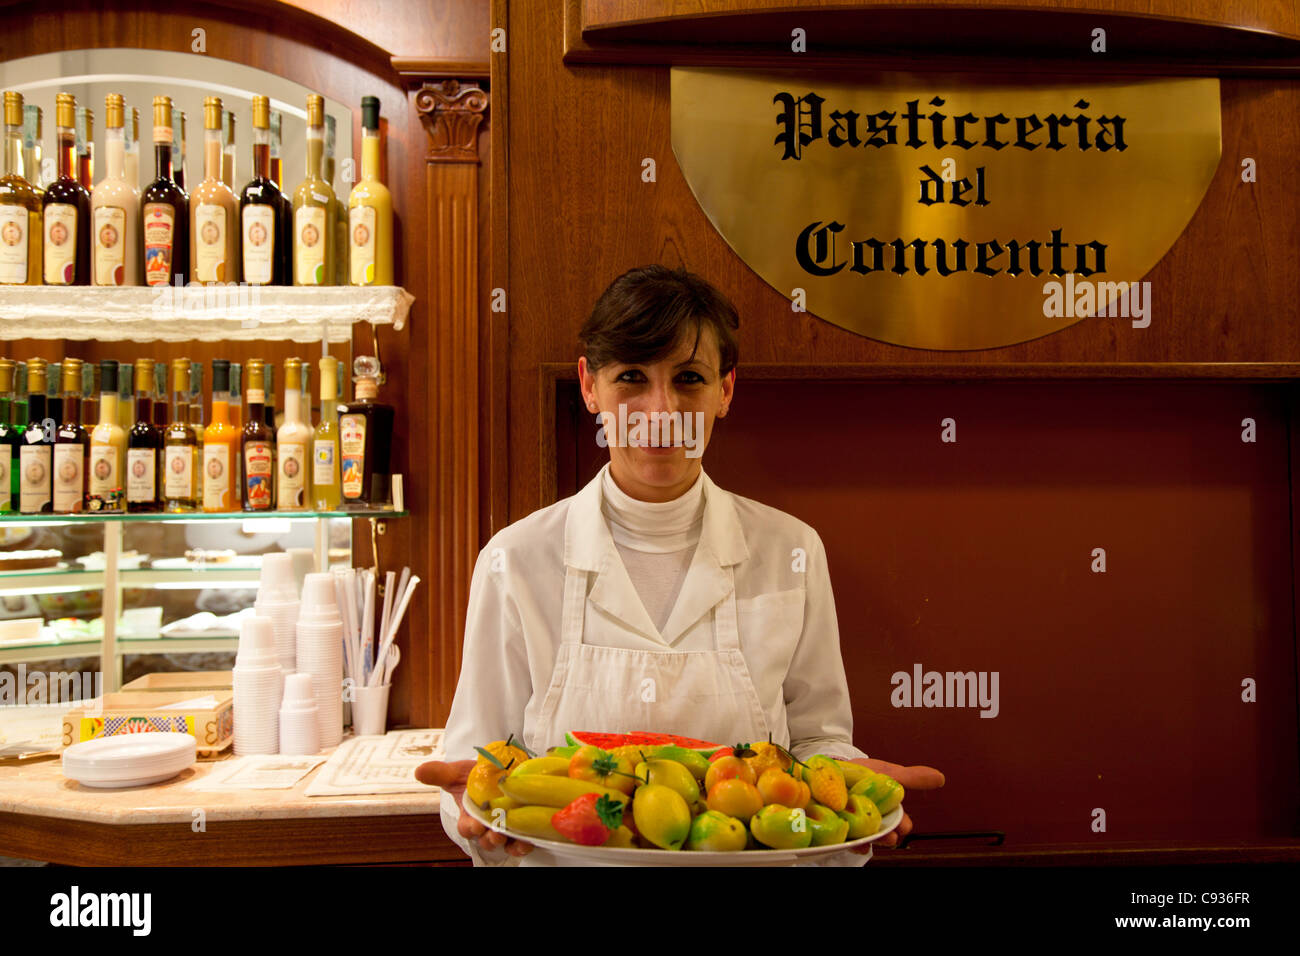 Sicily, Italy,  The proud owner of a sweet shop holding a plate of Marzipan fruits Stock Photo